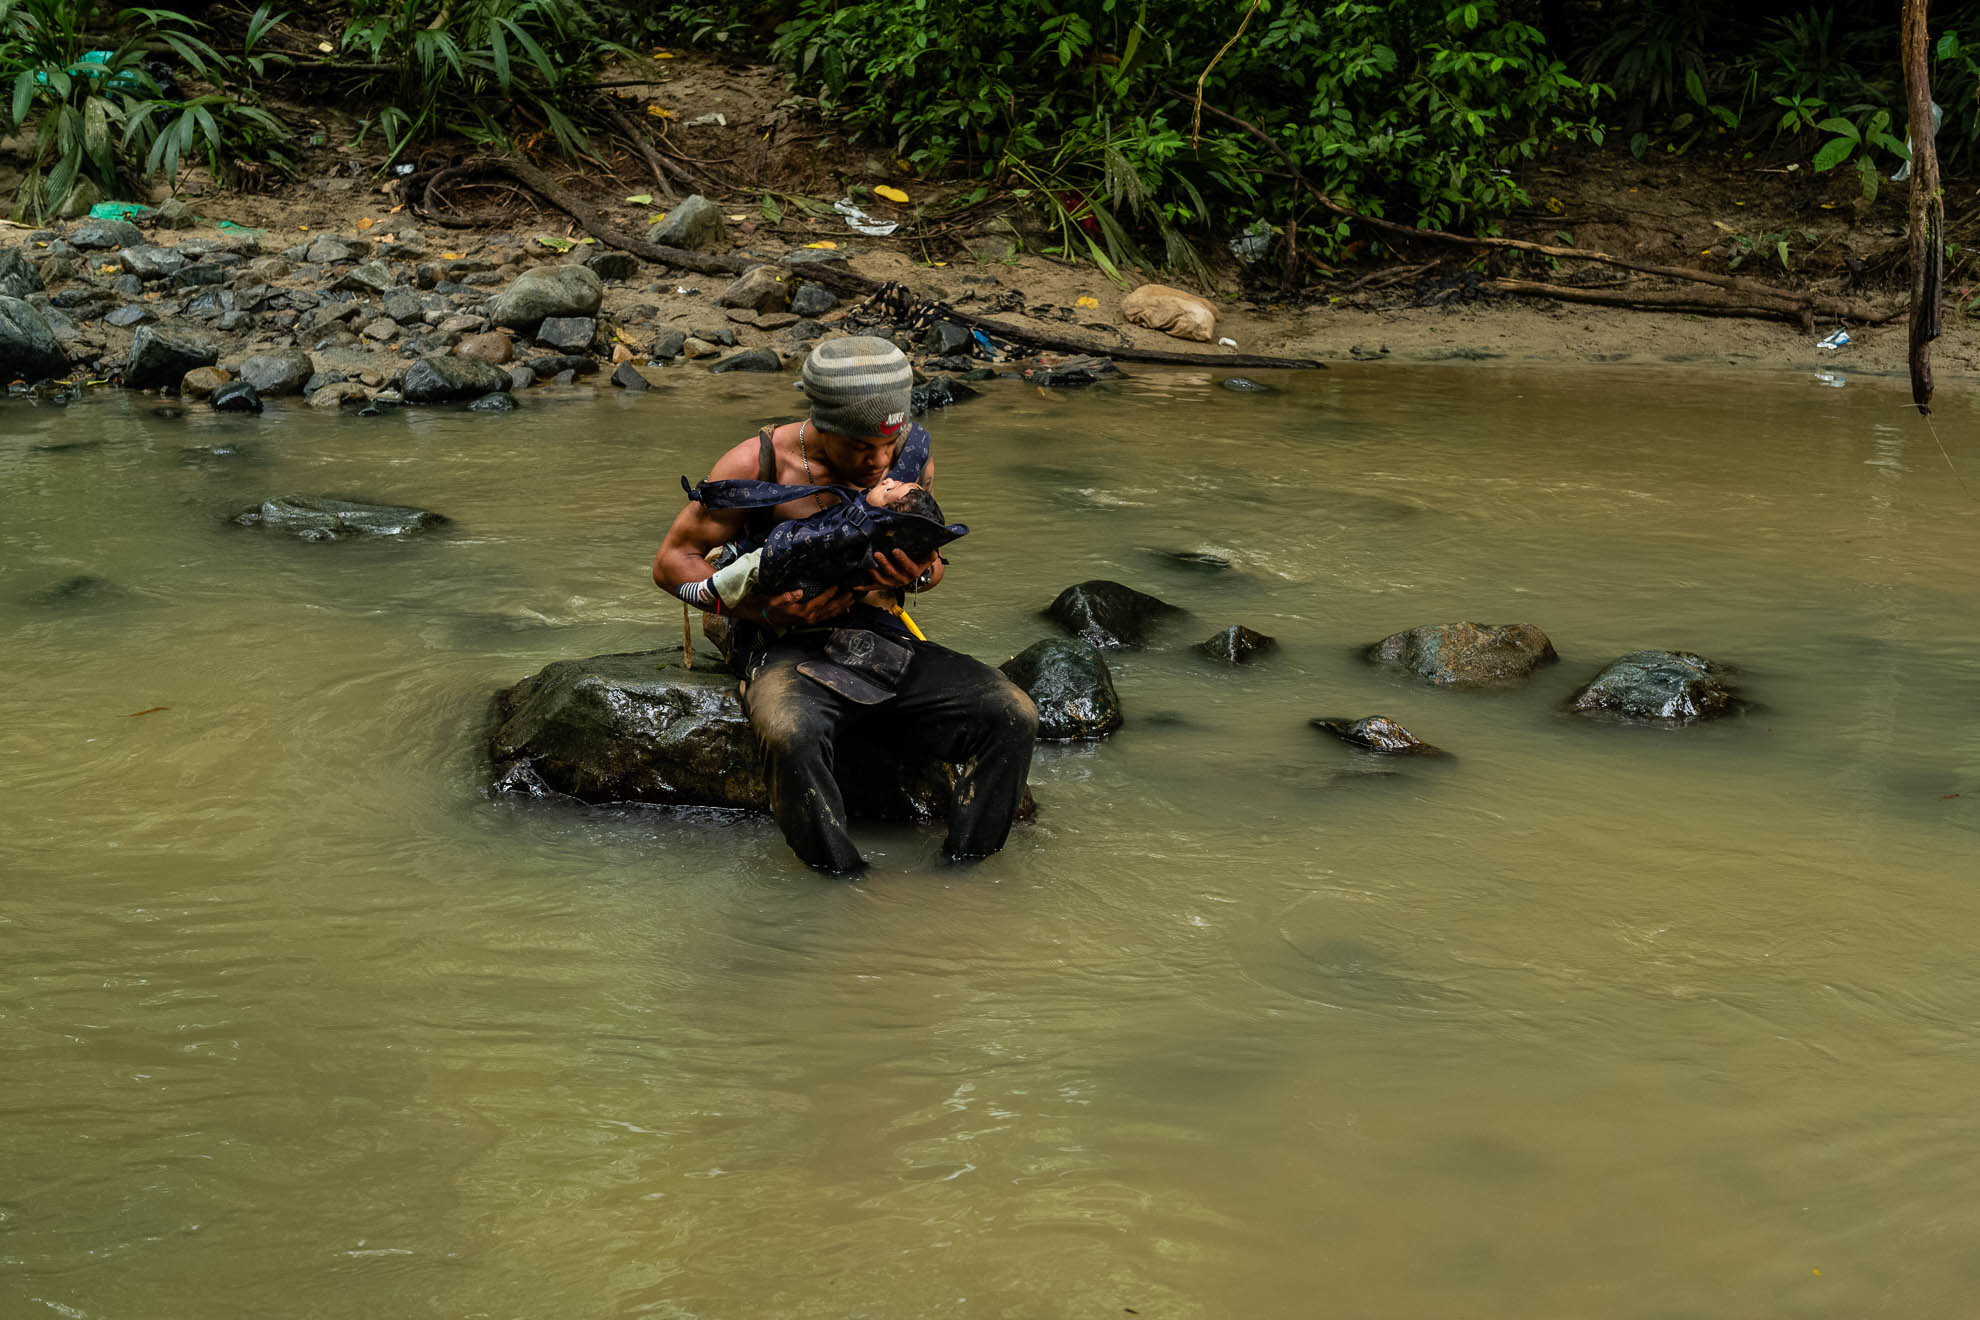 A man kisses his baby, just a few months old, during a break in a creek on the road in the Darien Gap between Colombia and Panama. Forty thousand minors have crossed the jungle so far this year, many of them babies. Like tens of thousands of Venezuelans, they cross this wild and roadless route believing they will reach the United States as their friends and neighbors have done weeks before. September 2022.